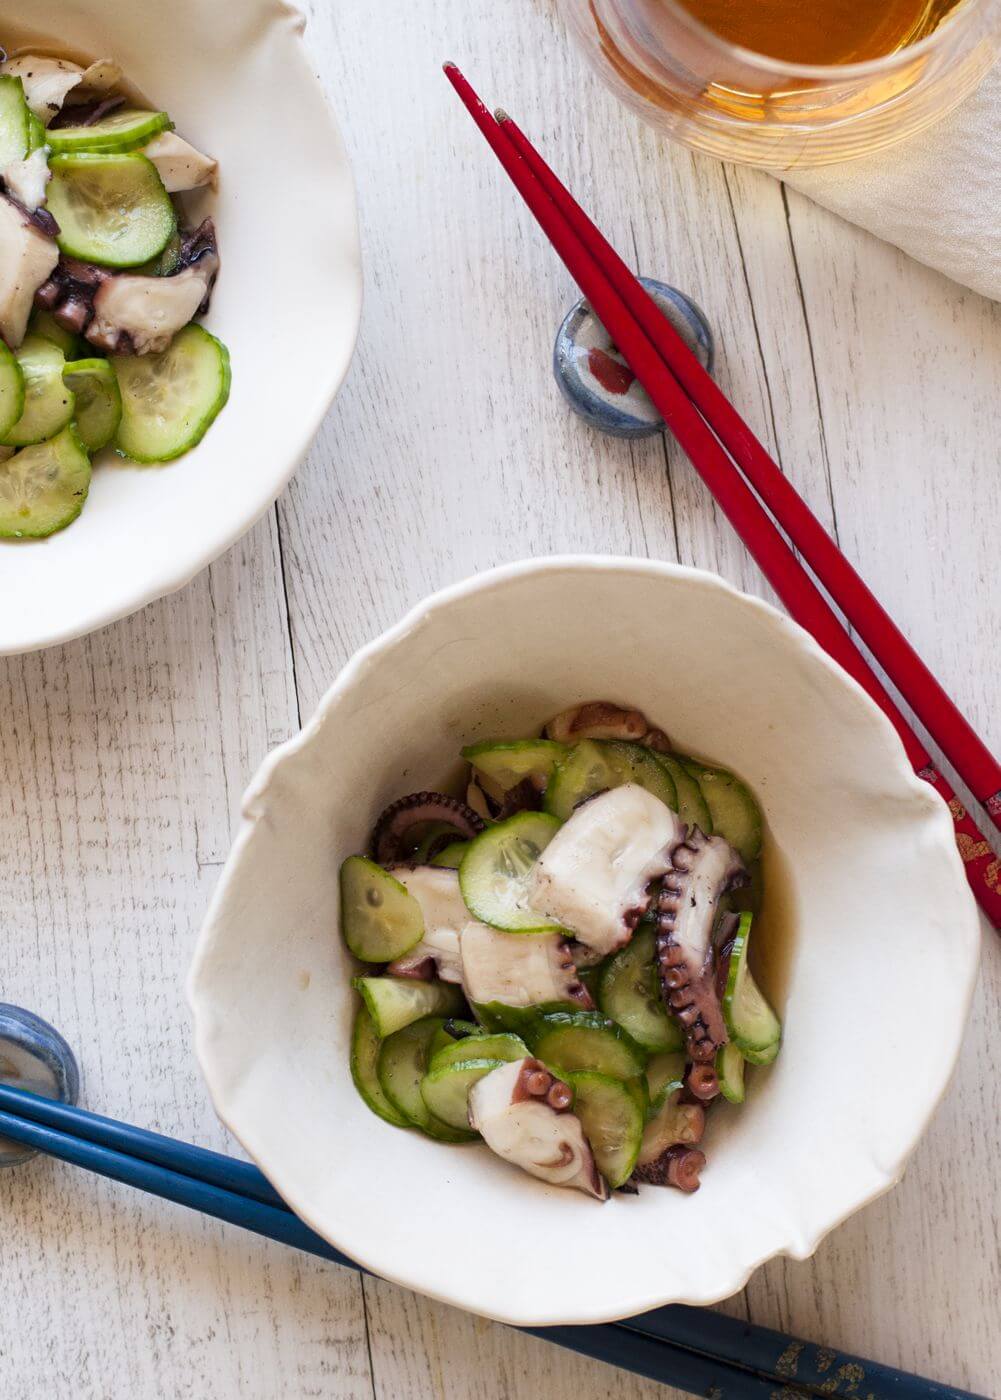 Octopus and cucumber sunomono is one of the regular Izakaya dishes. Boiling a whole octopus is quite simple and you can make this sunomono in no time. It tastes better when chilled.